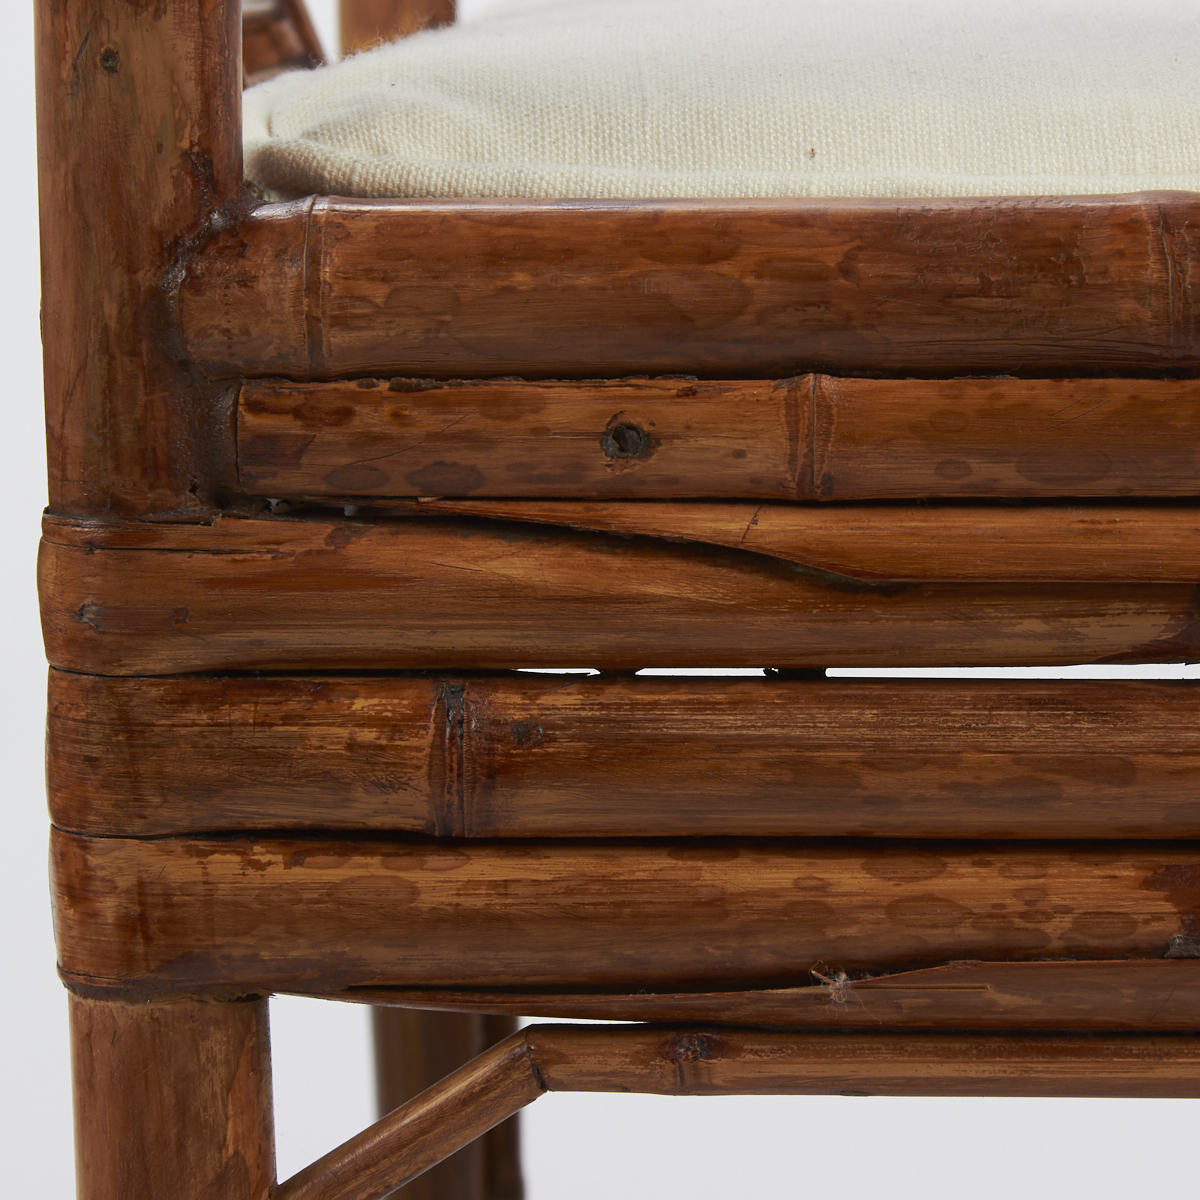 Pair of Chinese Bound Bamboo Chairs - Image 6 of 9